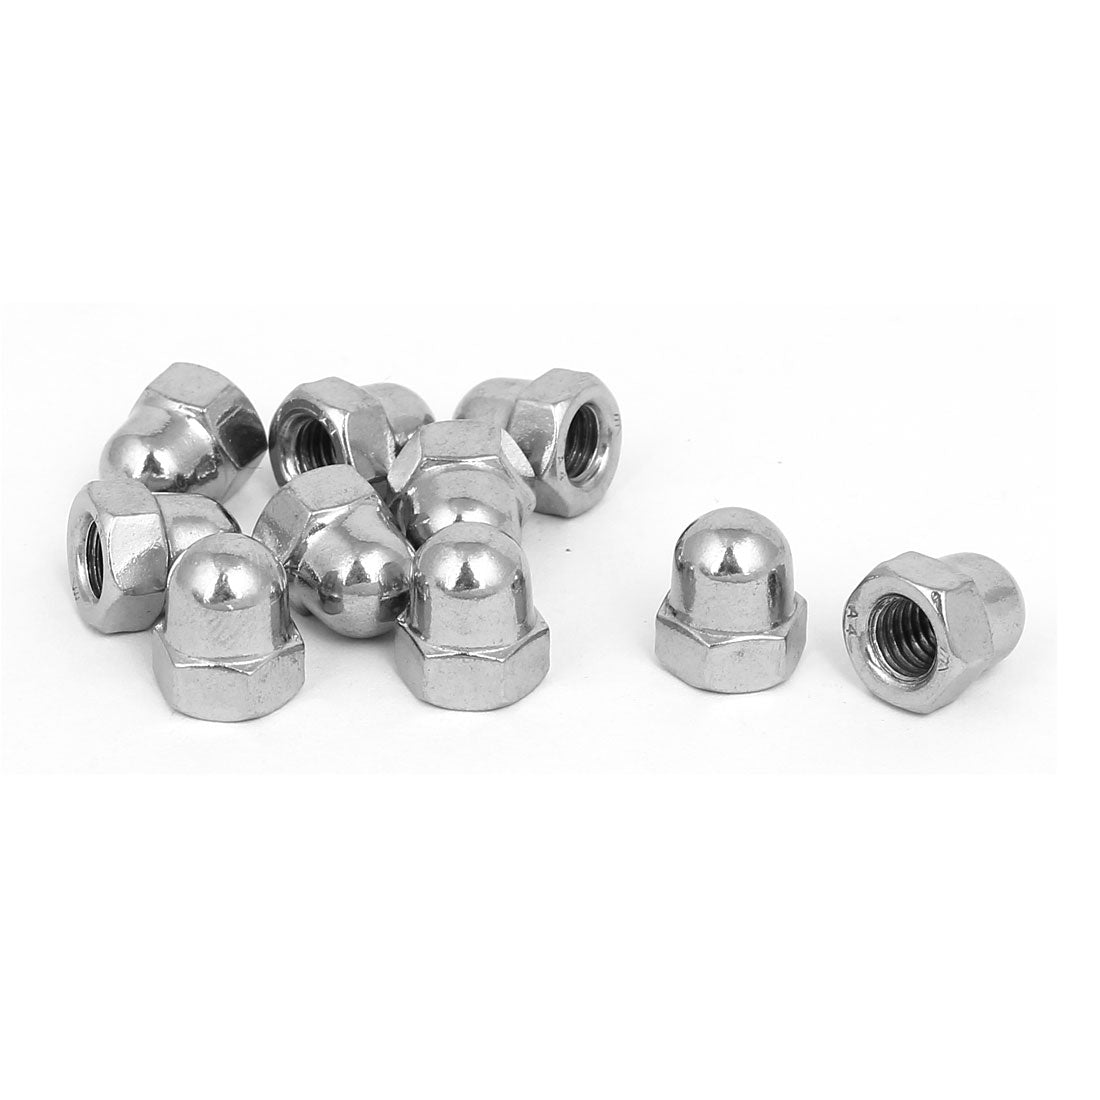 Uxcell Uxcell M4 Thread Dia 316 Stainless Steel Dome Head Cap Acorn Hex Nut Silver Tone 10pcs